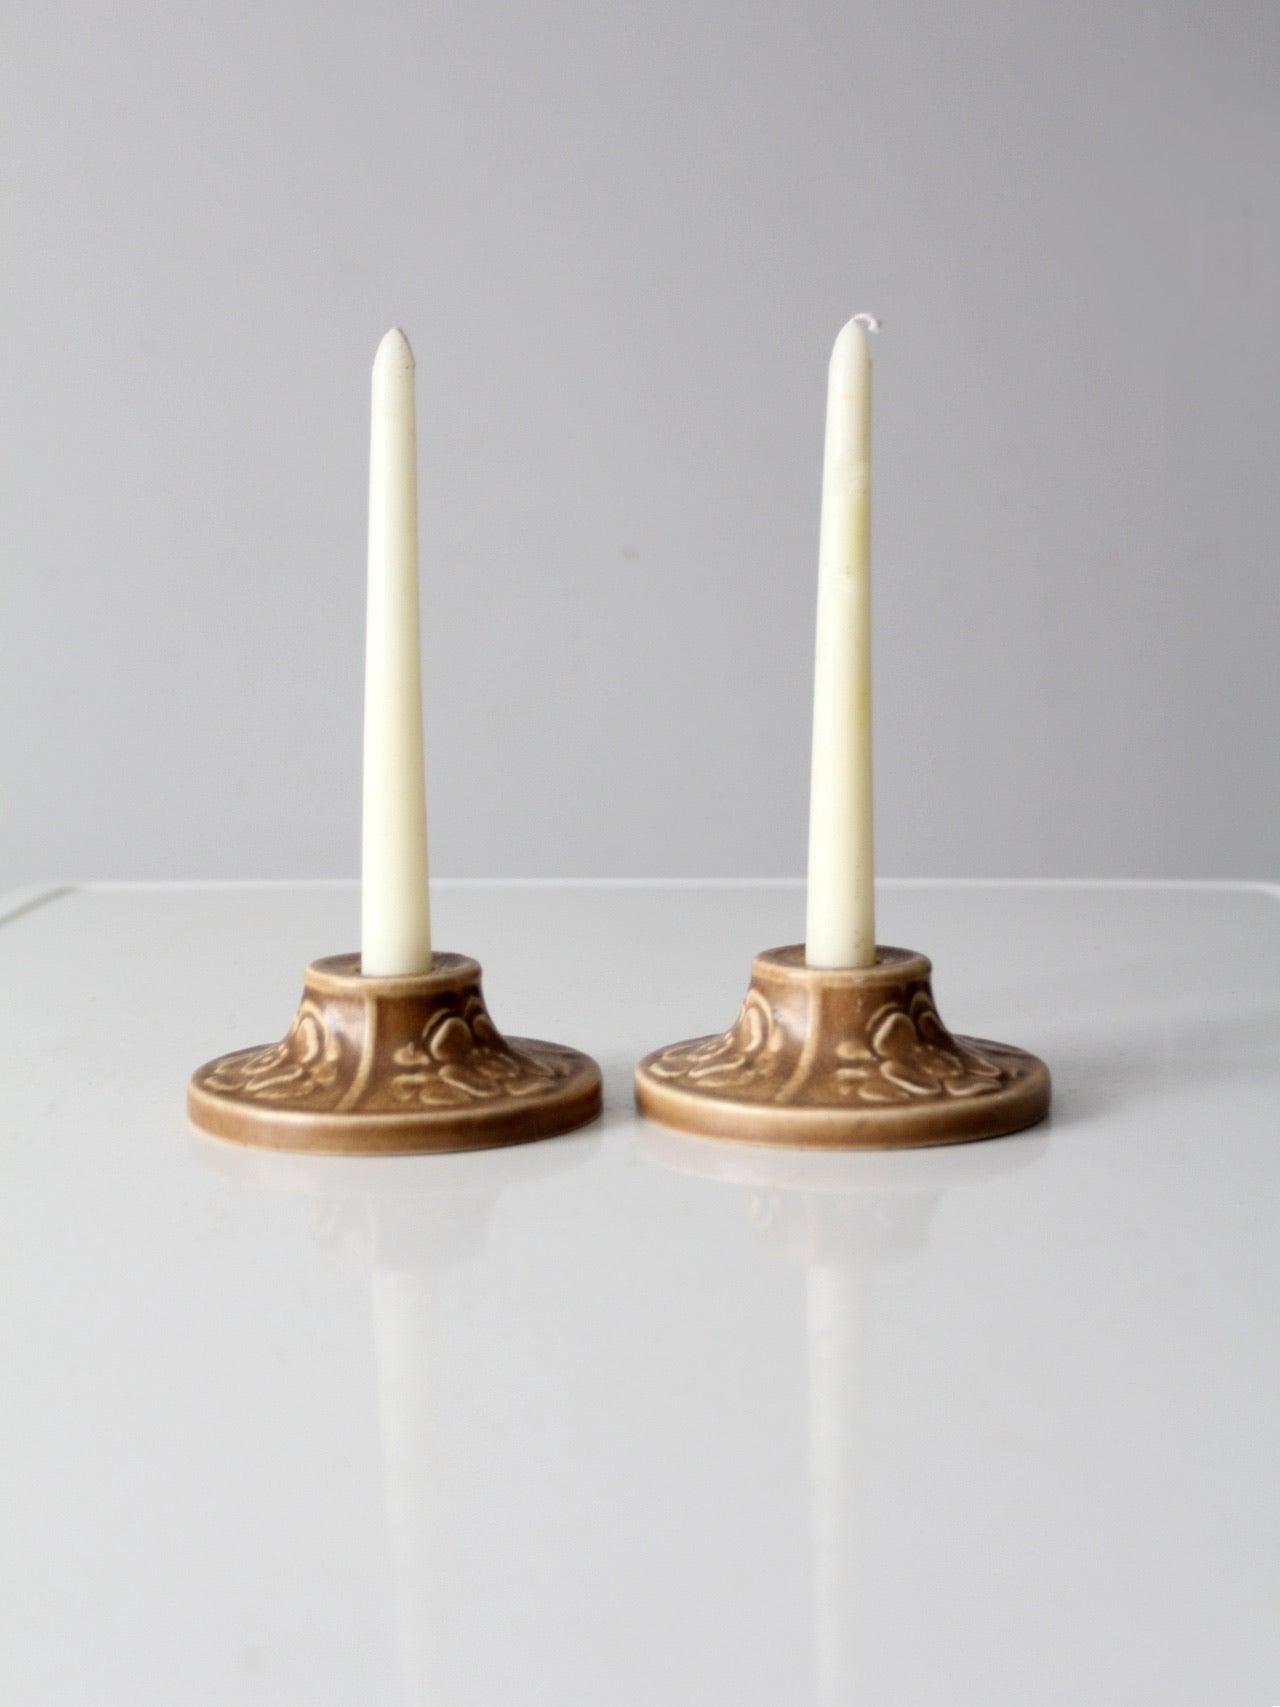 antique Rookwood Pottery candlestick holders pair